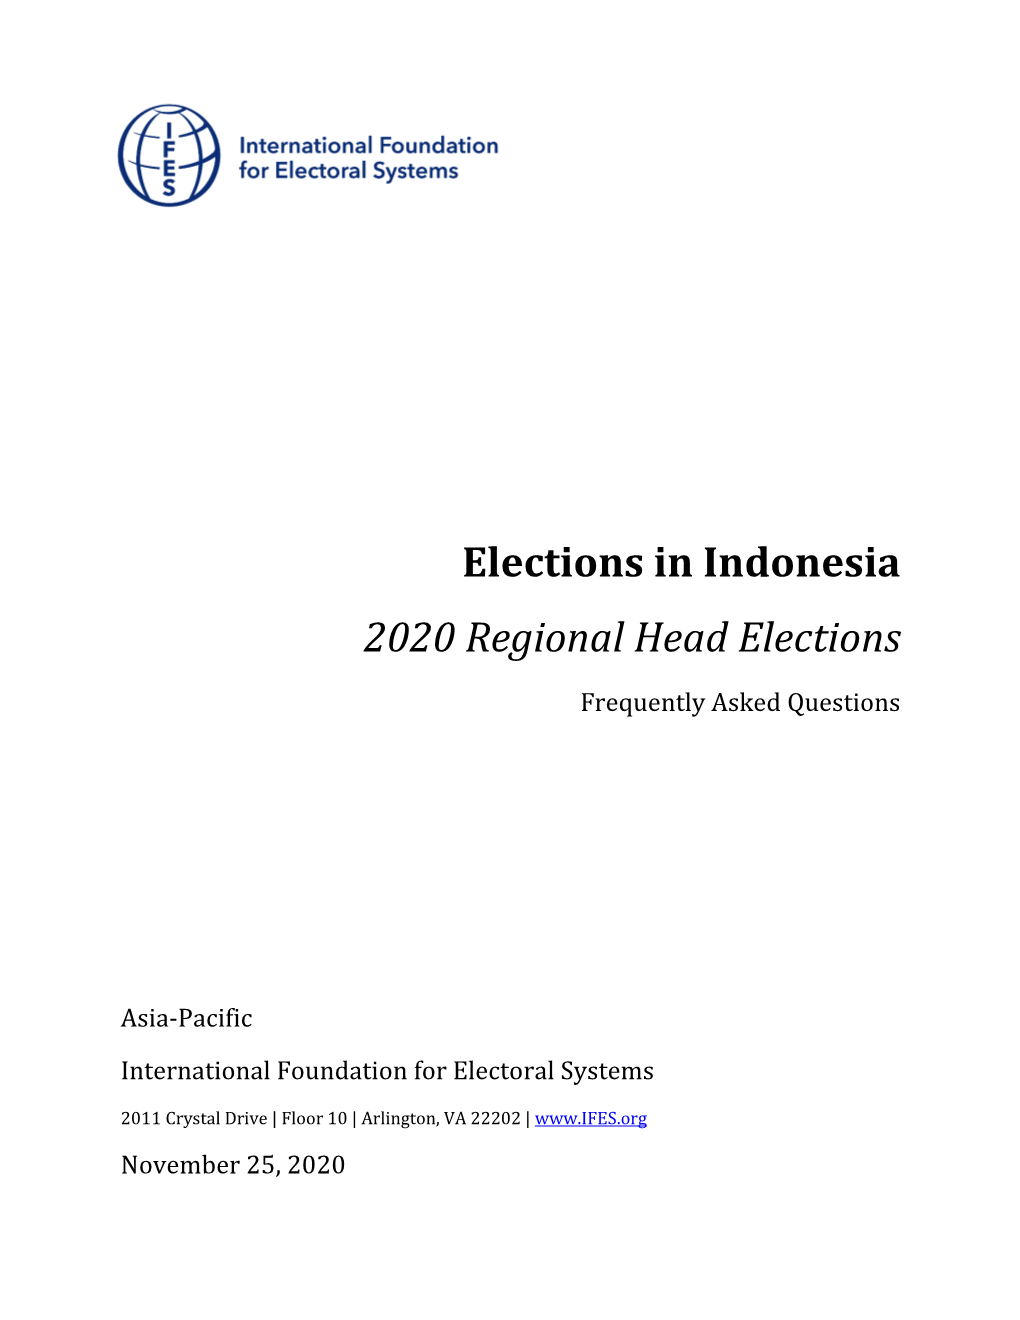 Elections in Indonesia: 2020 Regional Head Elections Frequently Asked Questions